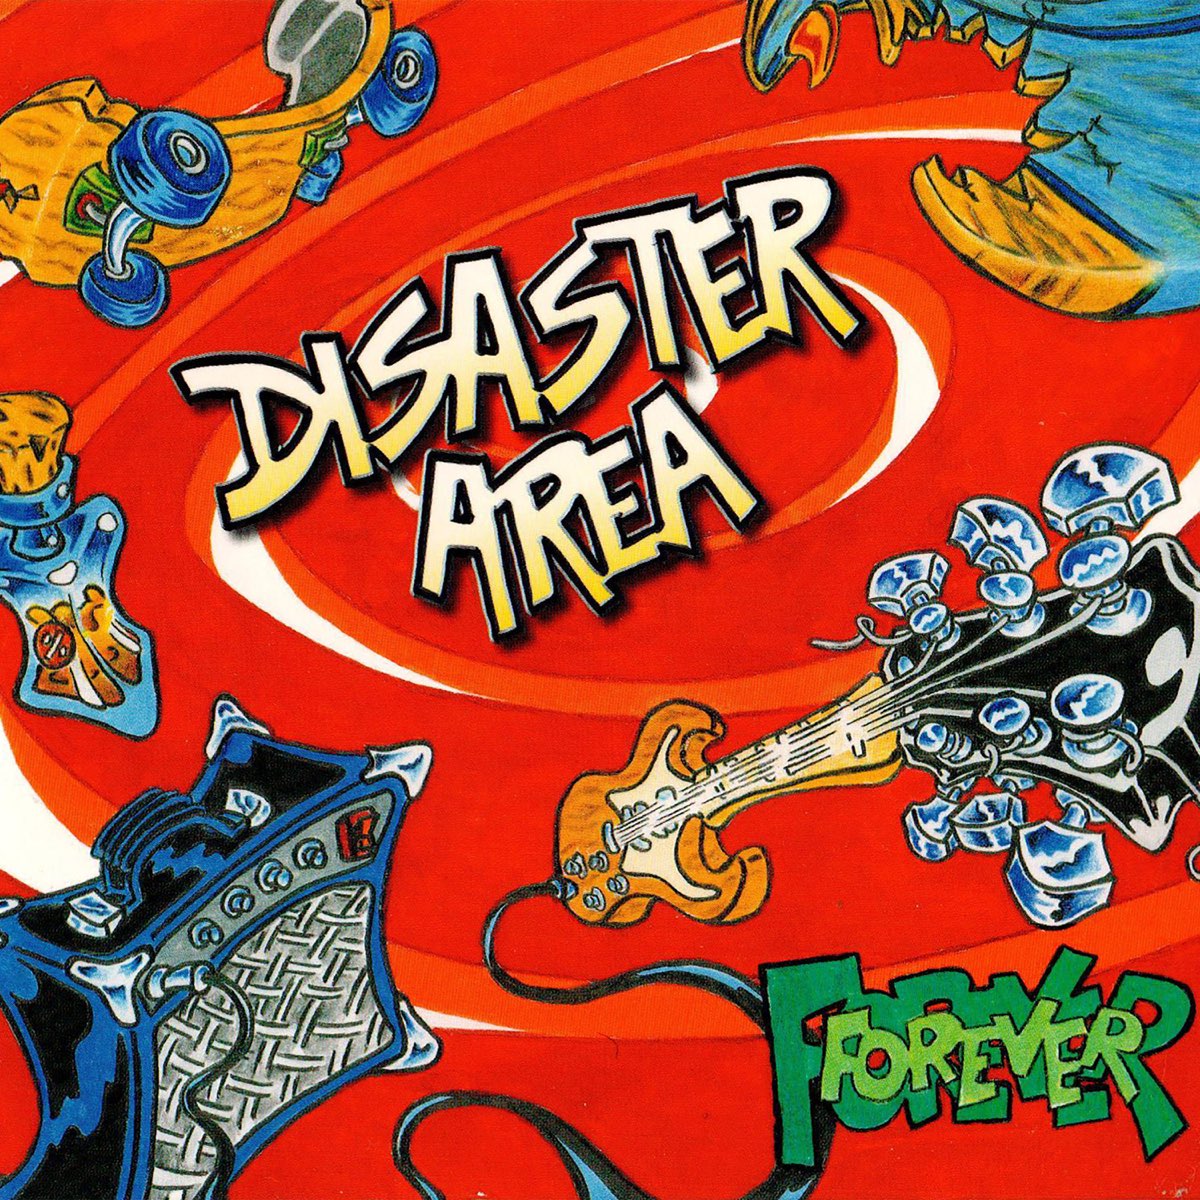 Disaster area. Eternal Catastrophe. The Disaster area. Pop Disaster Cover. Eternal Calamity China.